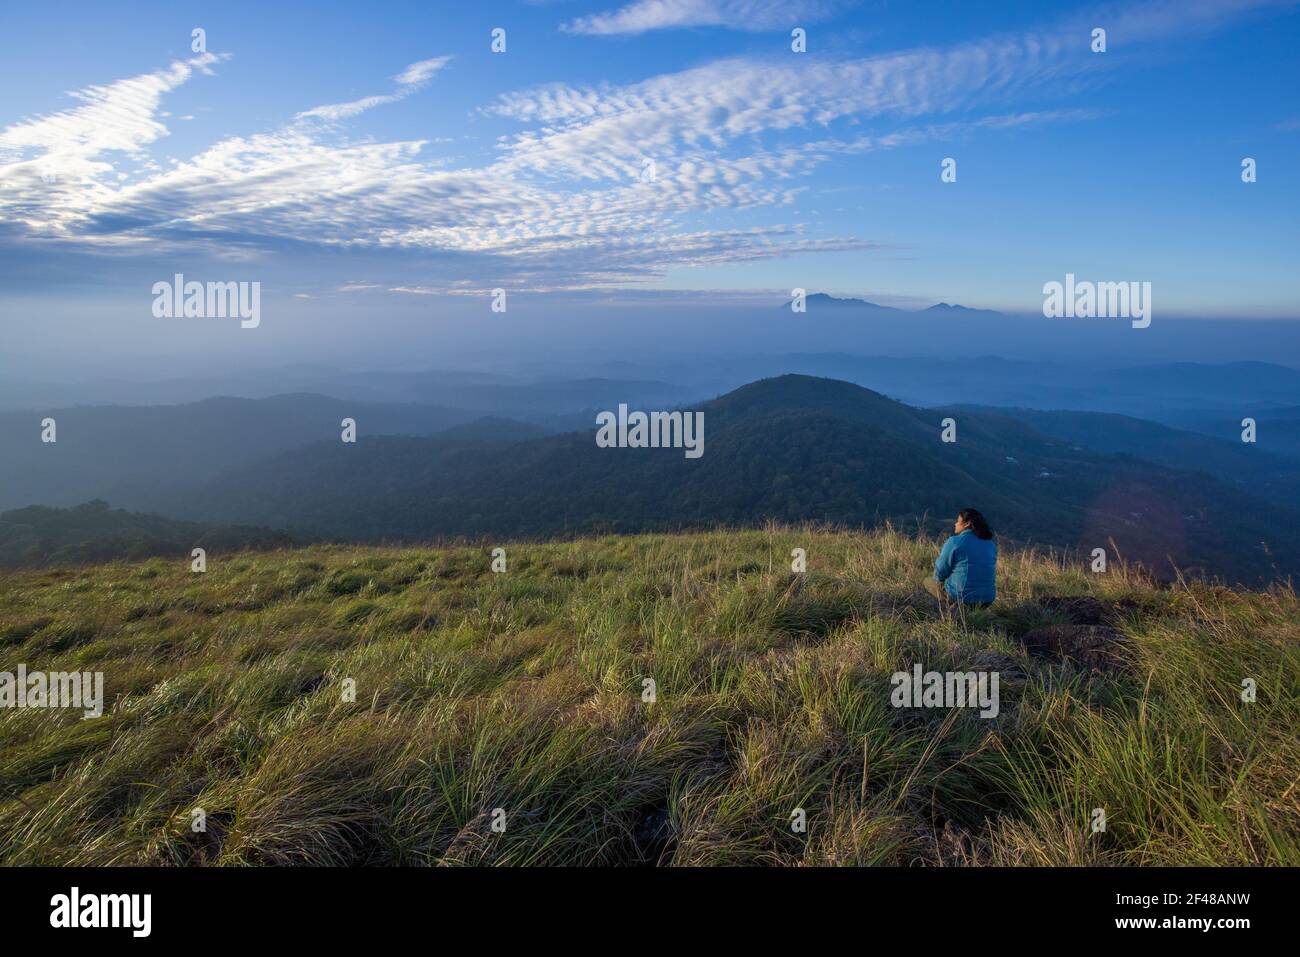 A lady enjoying the magnificent view from a hilltop in Wayanad during early morning (image taken in Wayanad, Kerala) Stock Photo